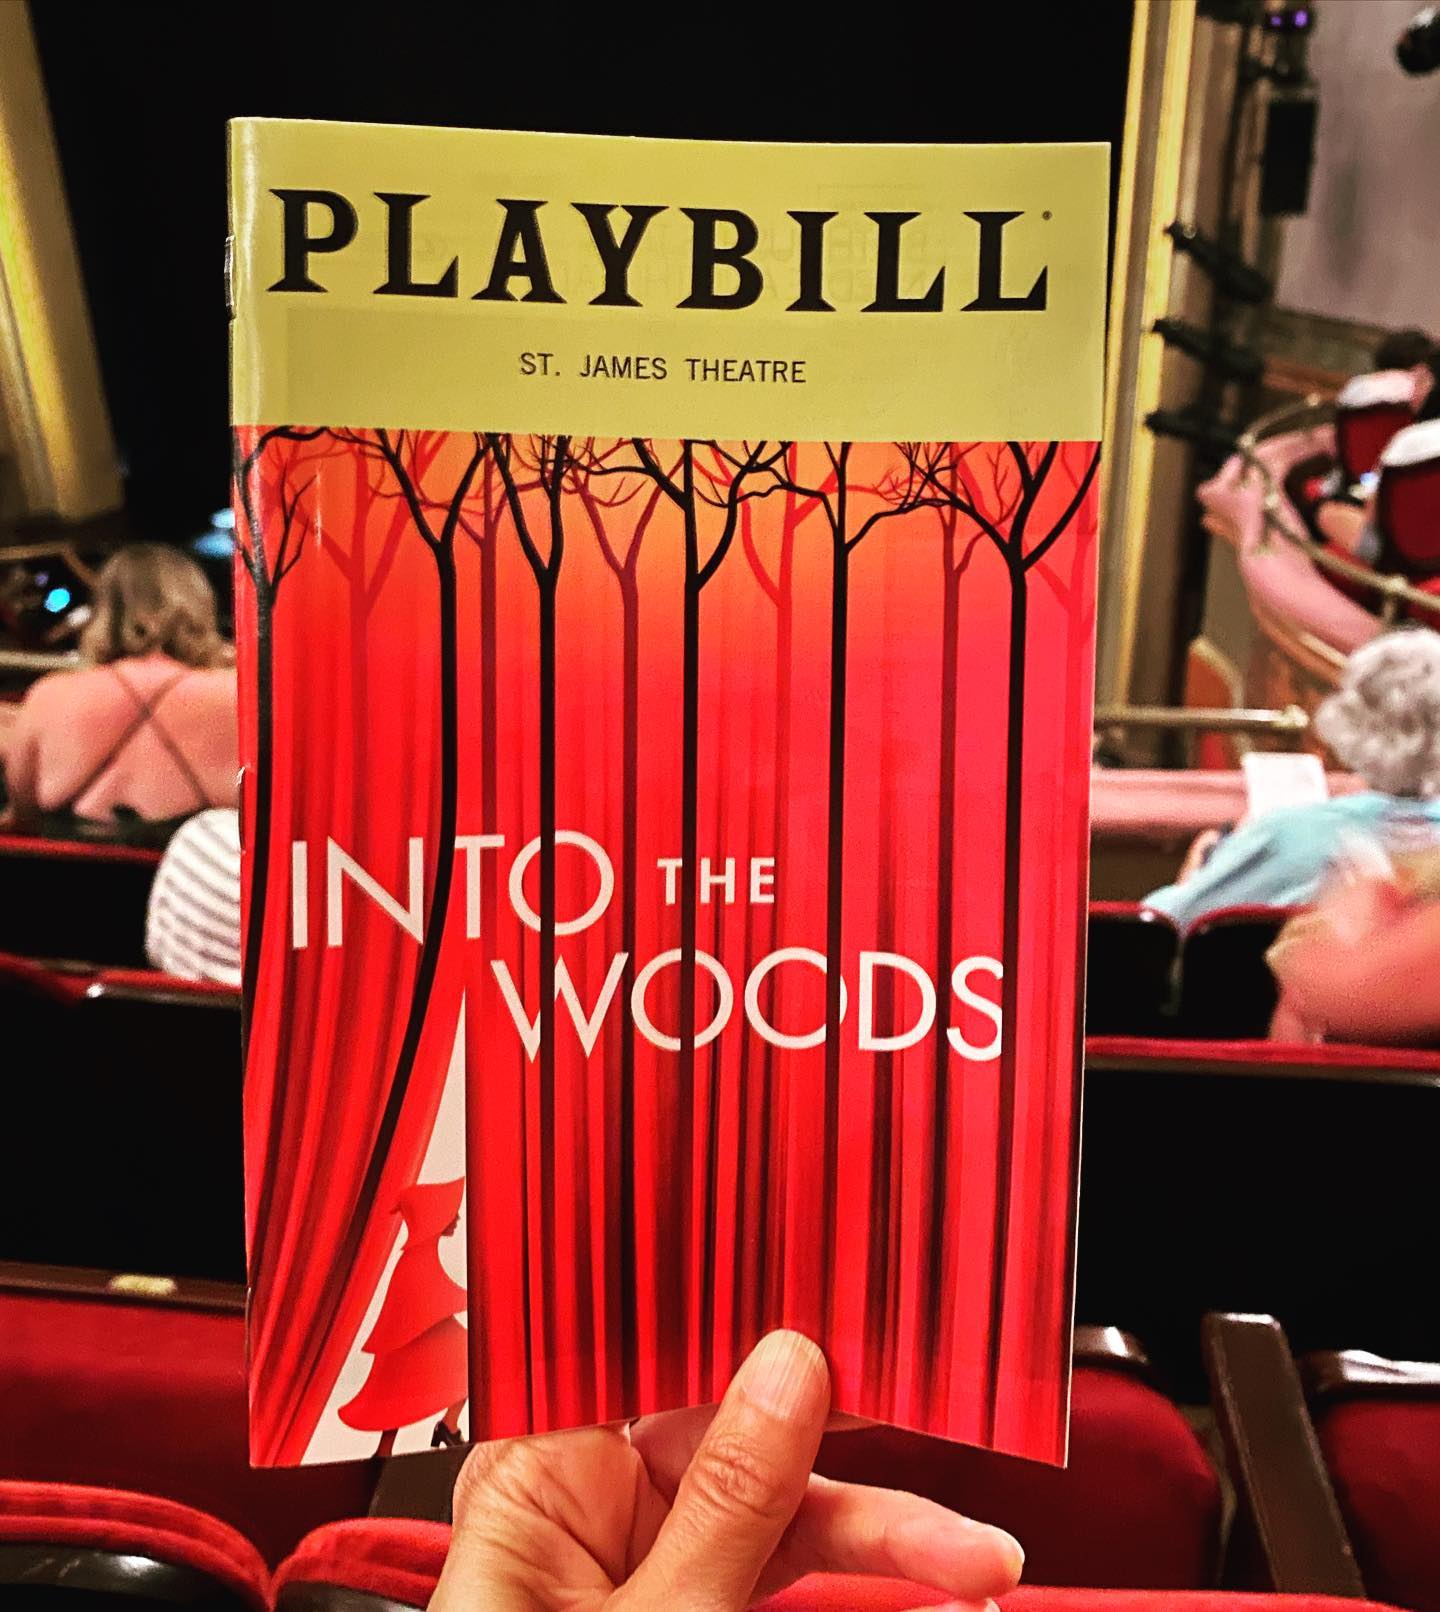 Swoon, swoon, swoon! This @intothewoodsbroadway is heavenly! #intothewoods #broadwaymusical #nyctheatre #broadway #sondheim #theatremagic #ilovetheatre #talentfordays #moretosay